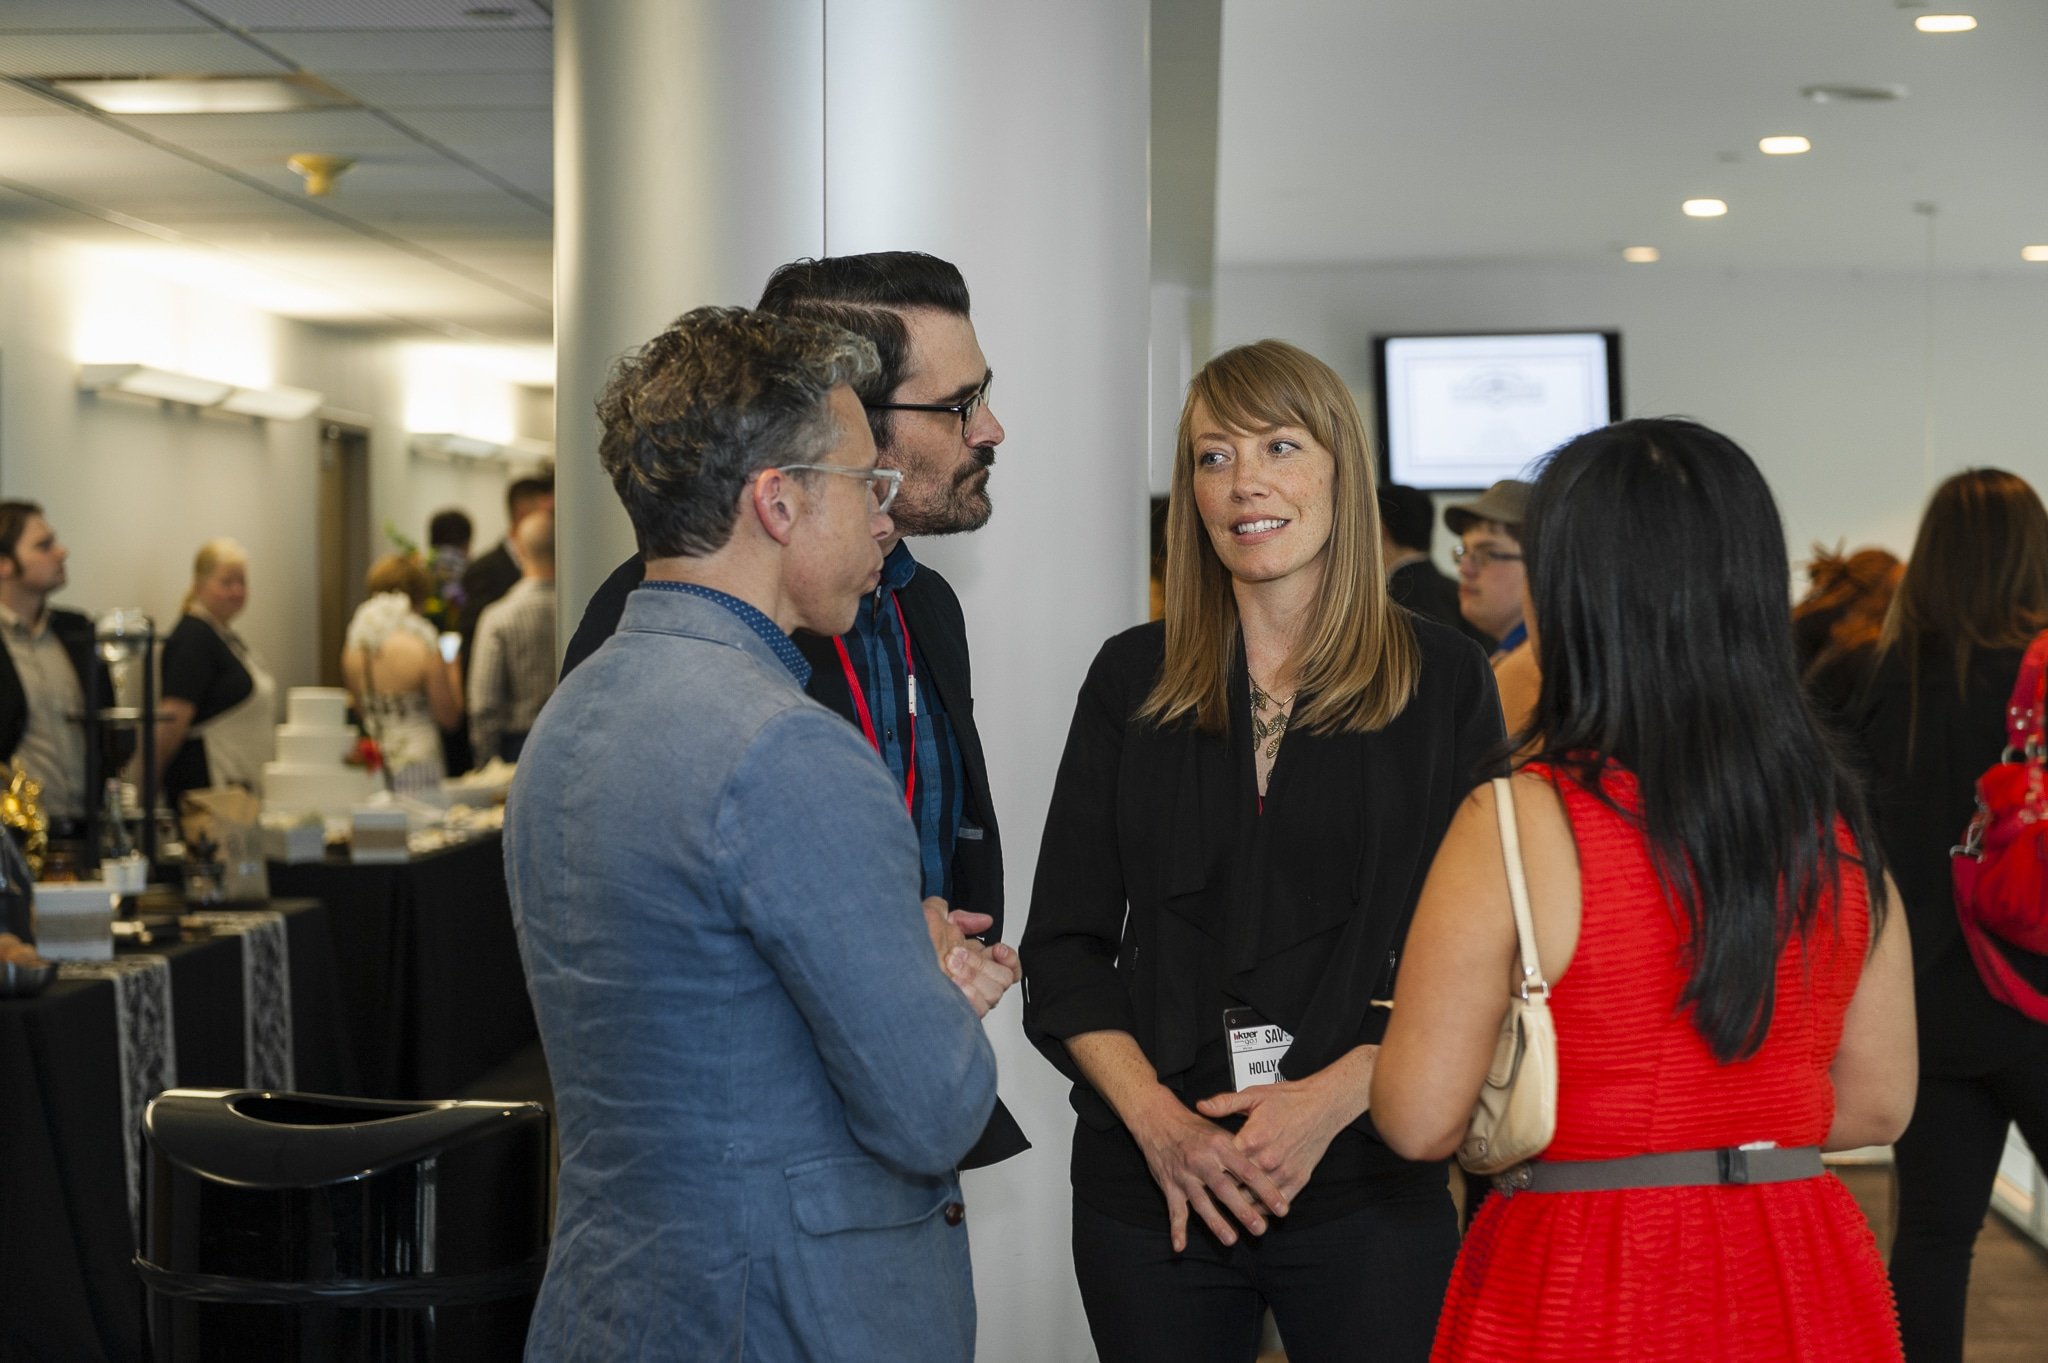 Celebrity judges included Ty Burrell ("Phil Dunphy" on television's Modern Family) and his chef wife Holly Burrell along with Radio West's Doug Fabrizio and food nerd Vanessa Chang shown here discussing food at the event.